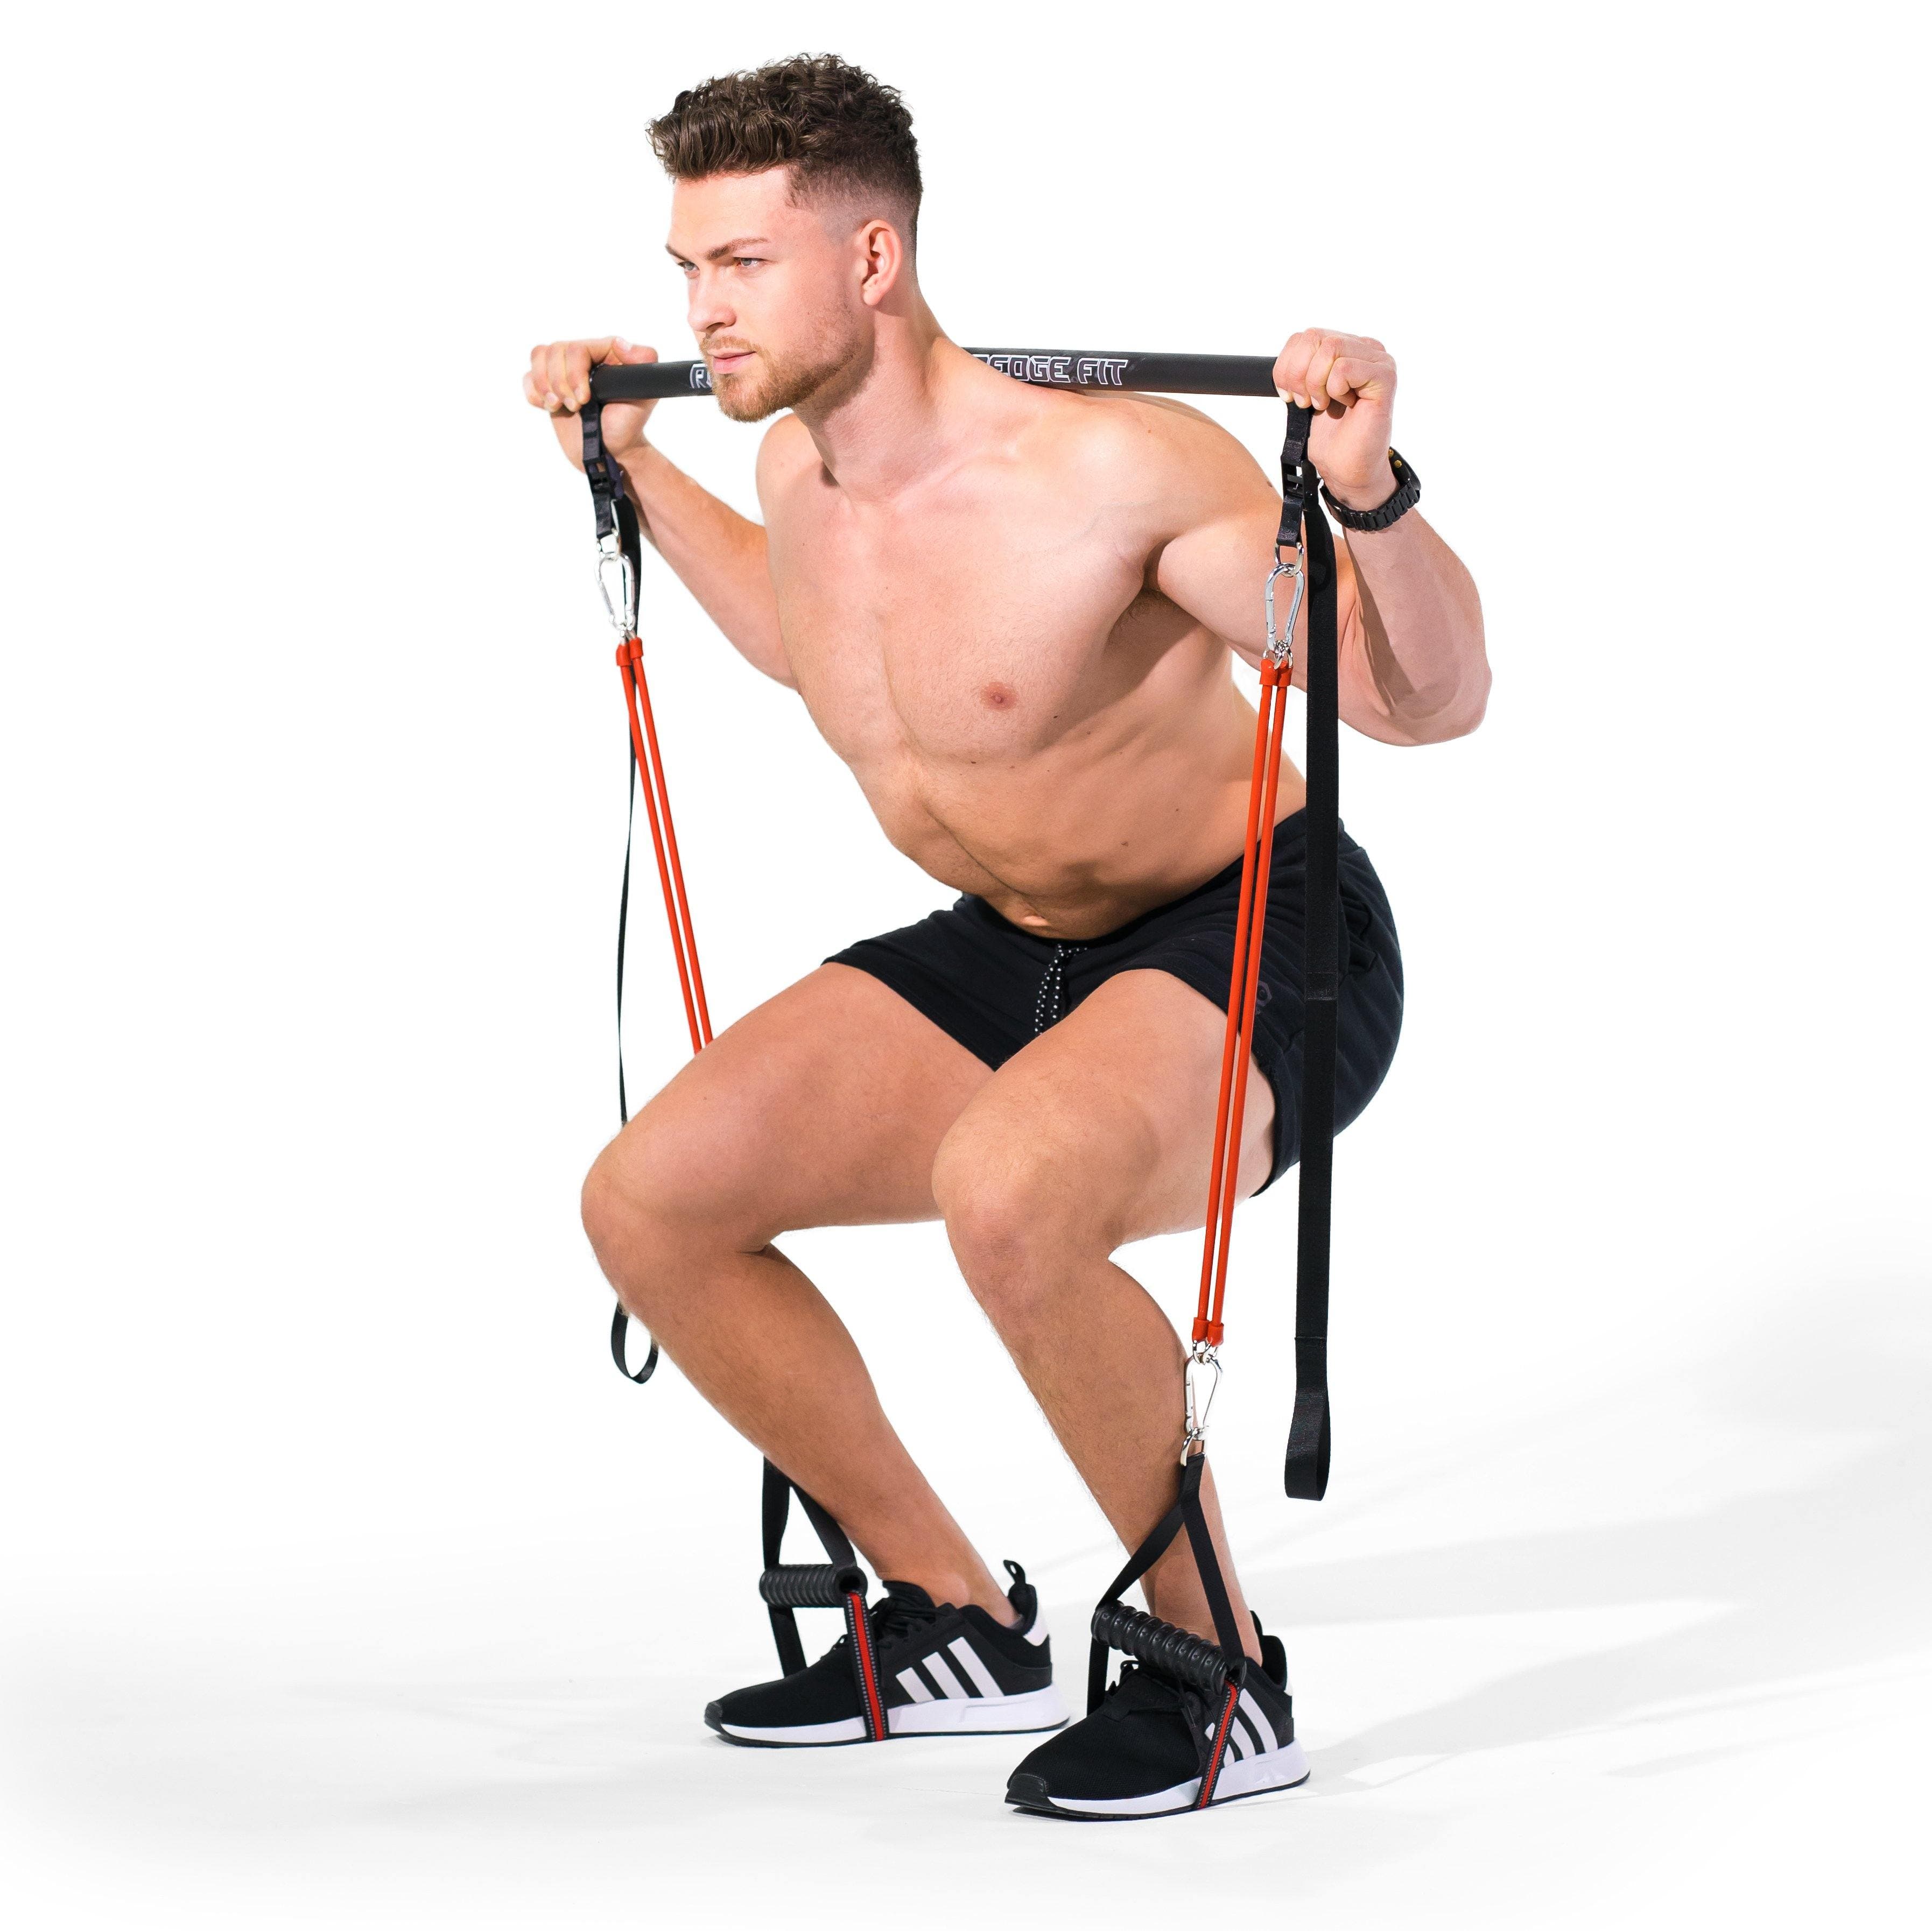 Full Body and Squat Workout equipment Kit For Home or traveling